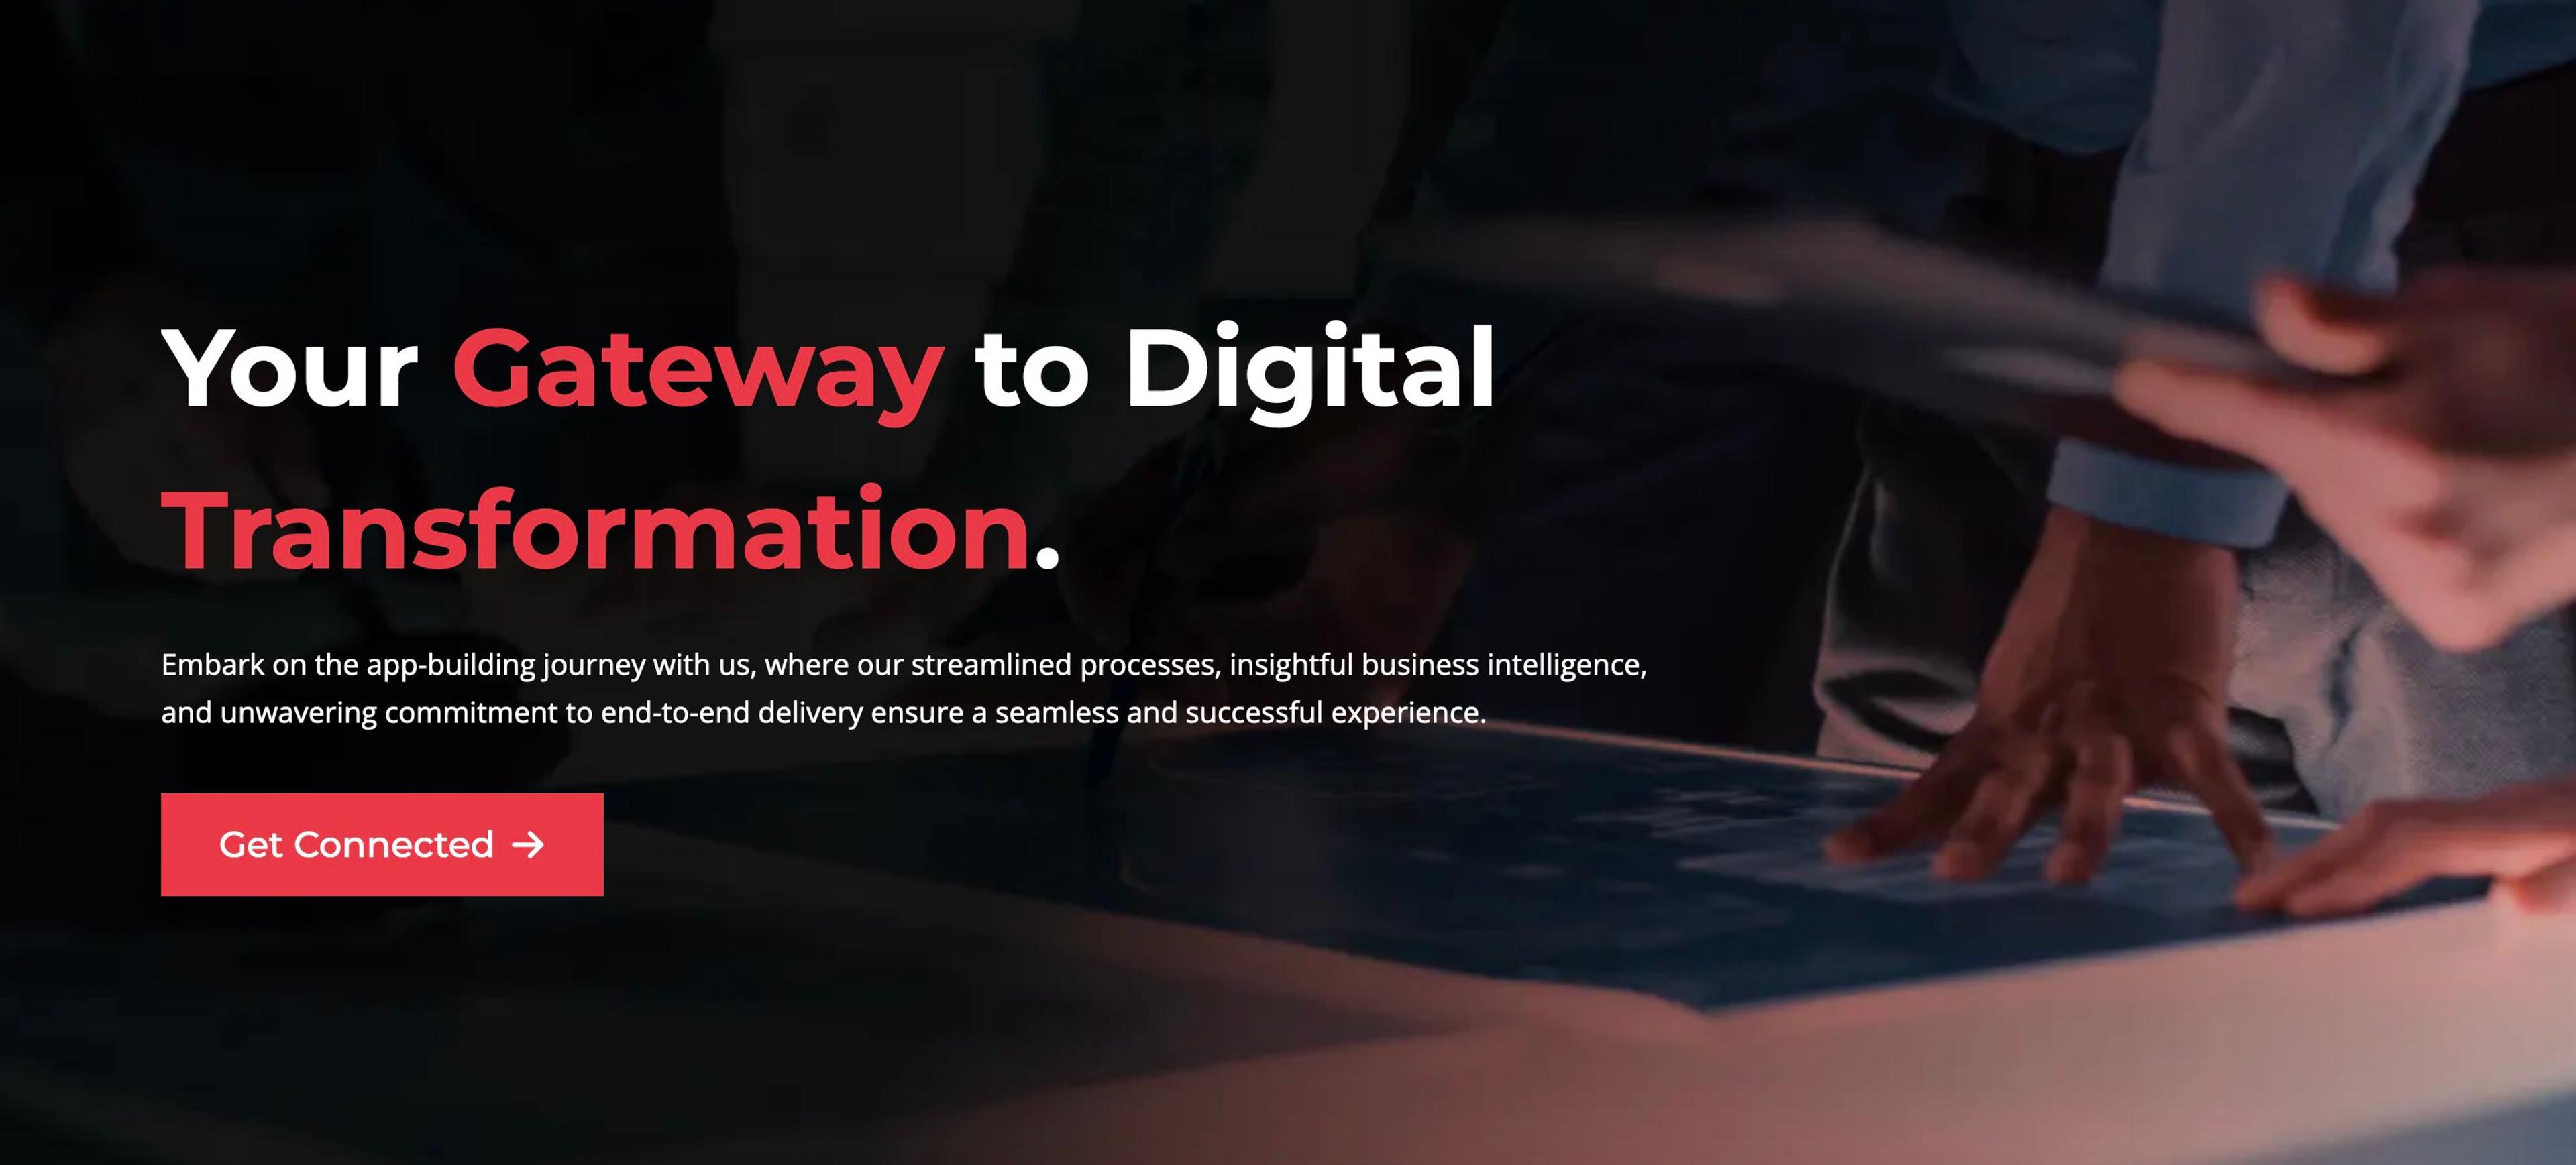 a landing page for a company called your gateway to digital transformation .